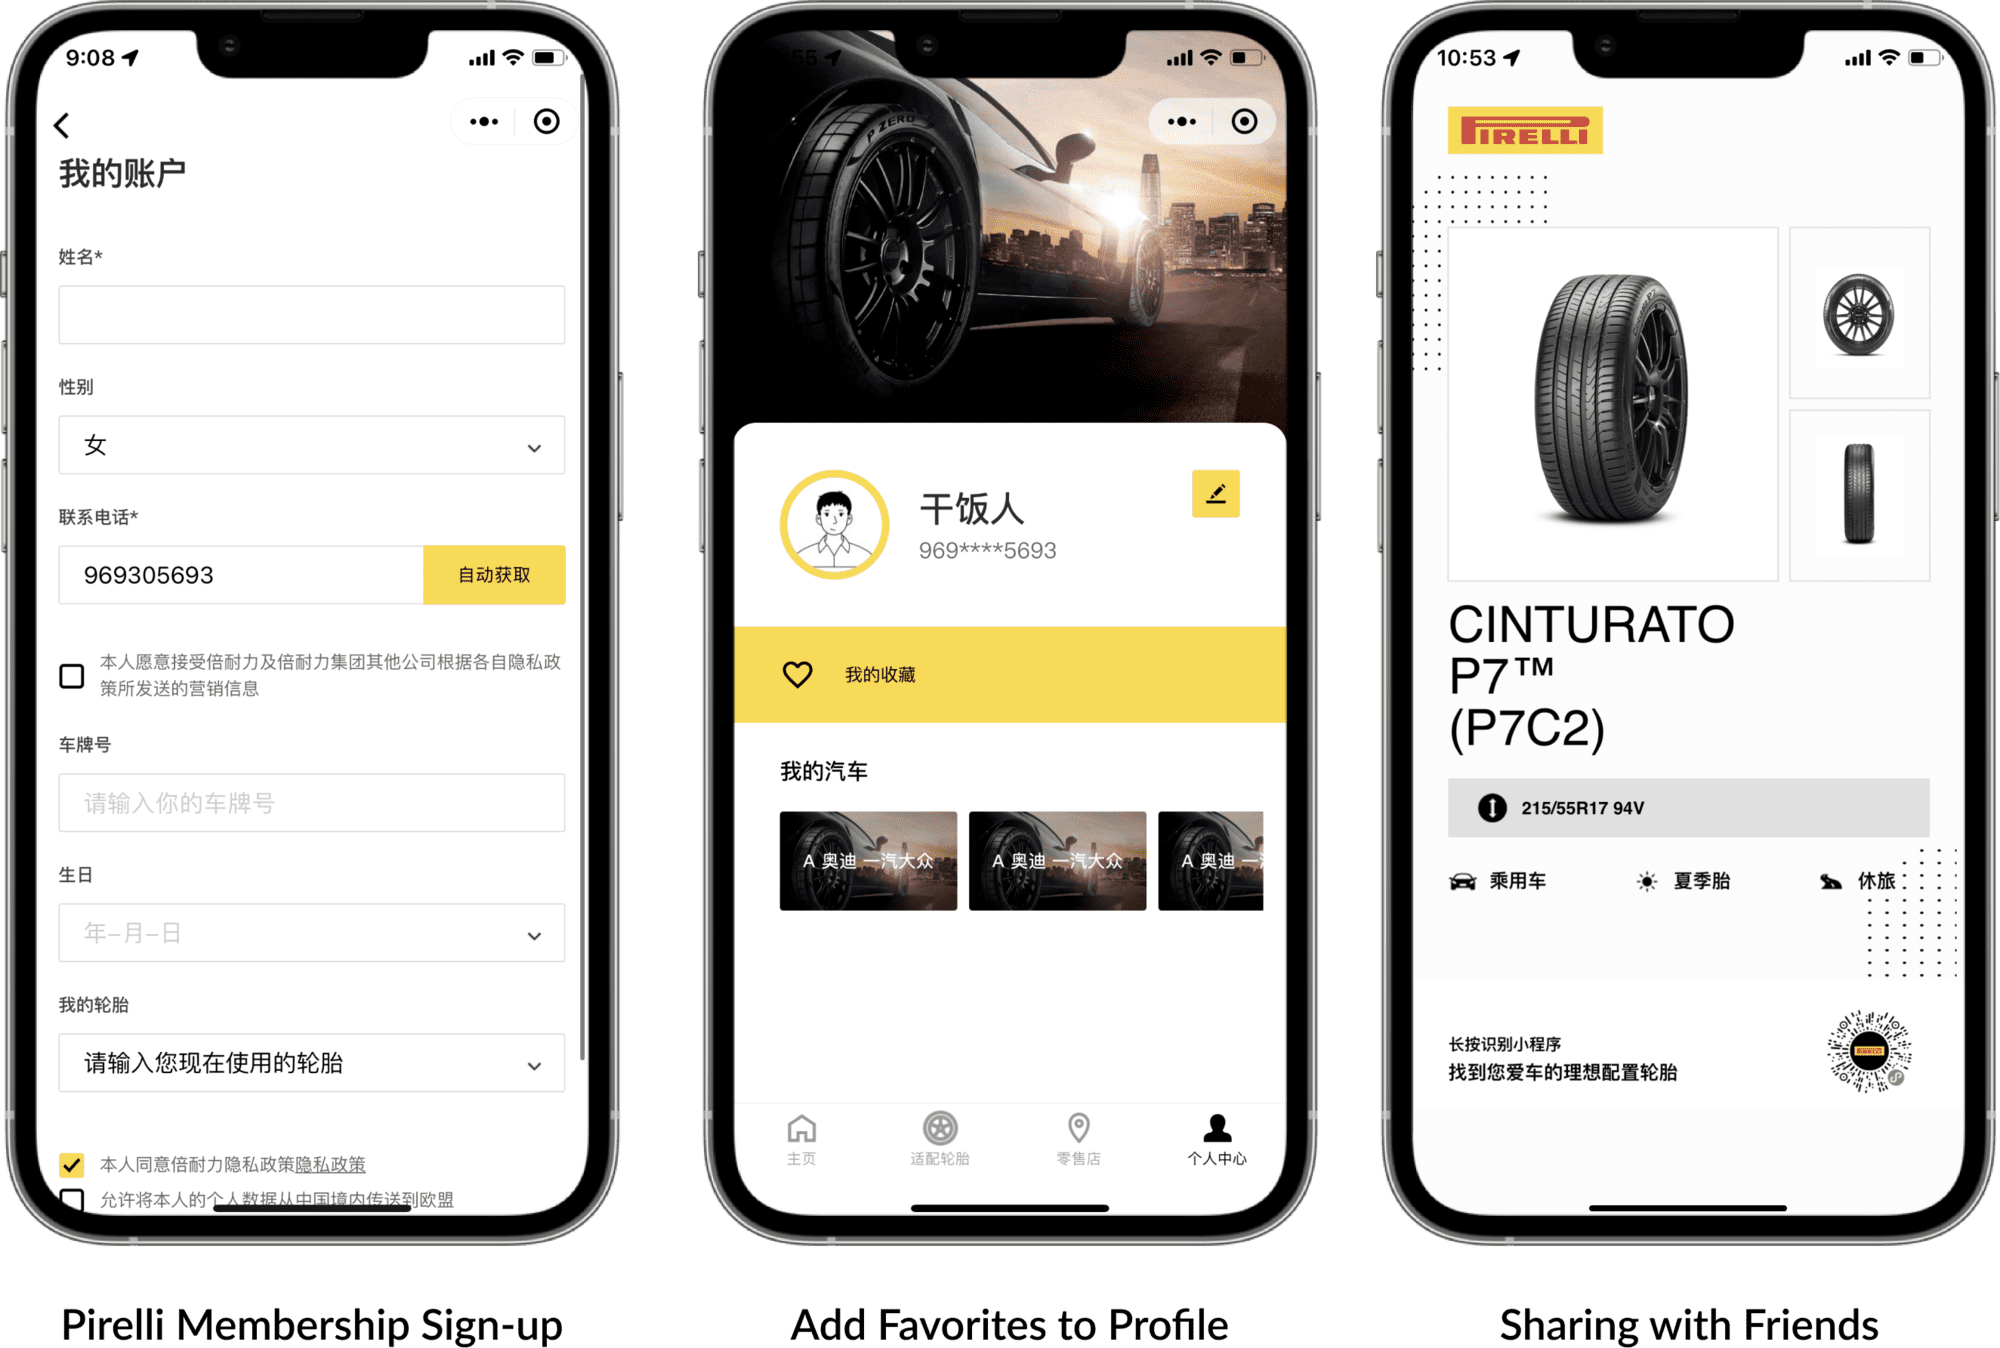 The Pirelli Mini Program also allows users to sign up for a Membership, add favorite products to their profiles, and share them with their contacts on WeChat